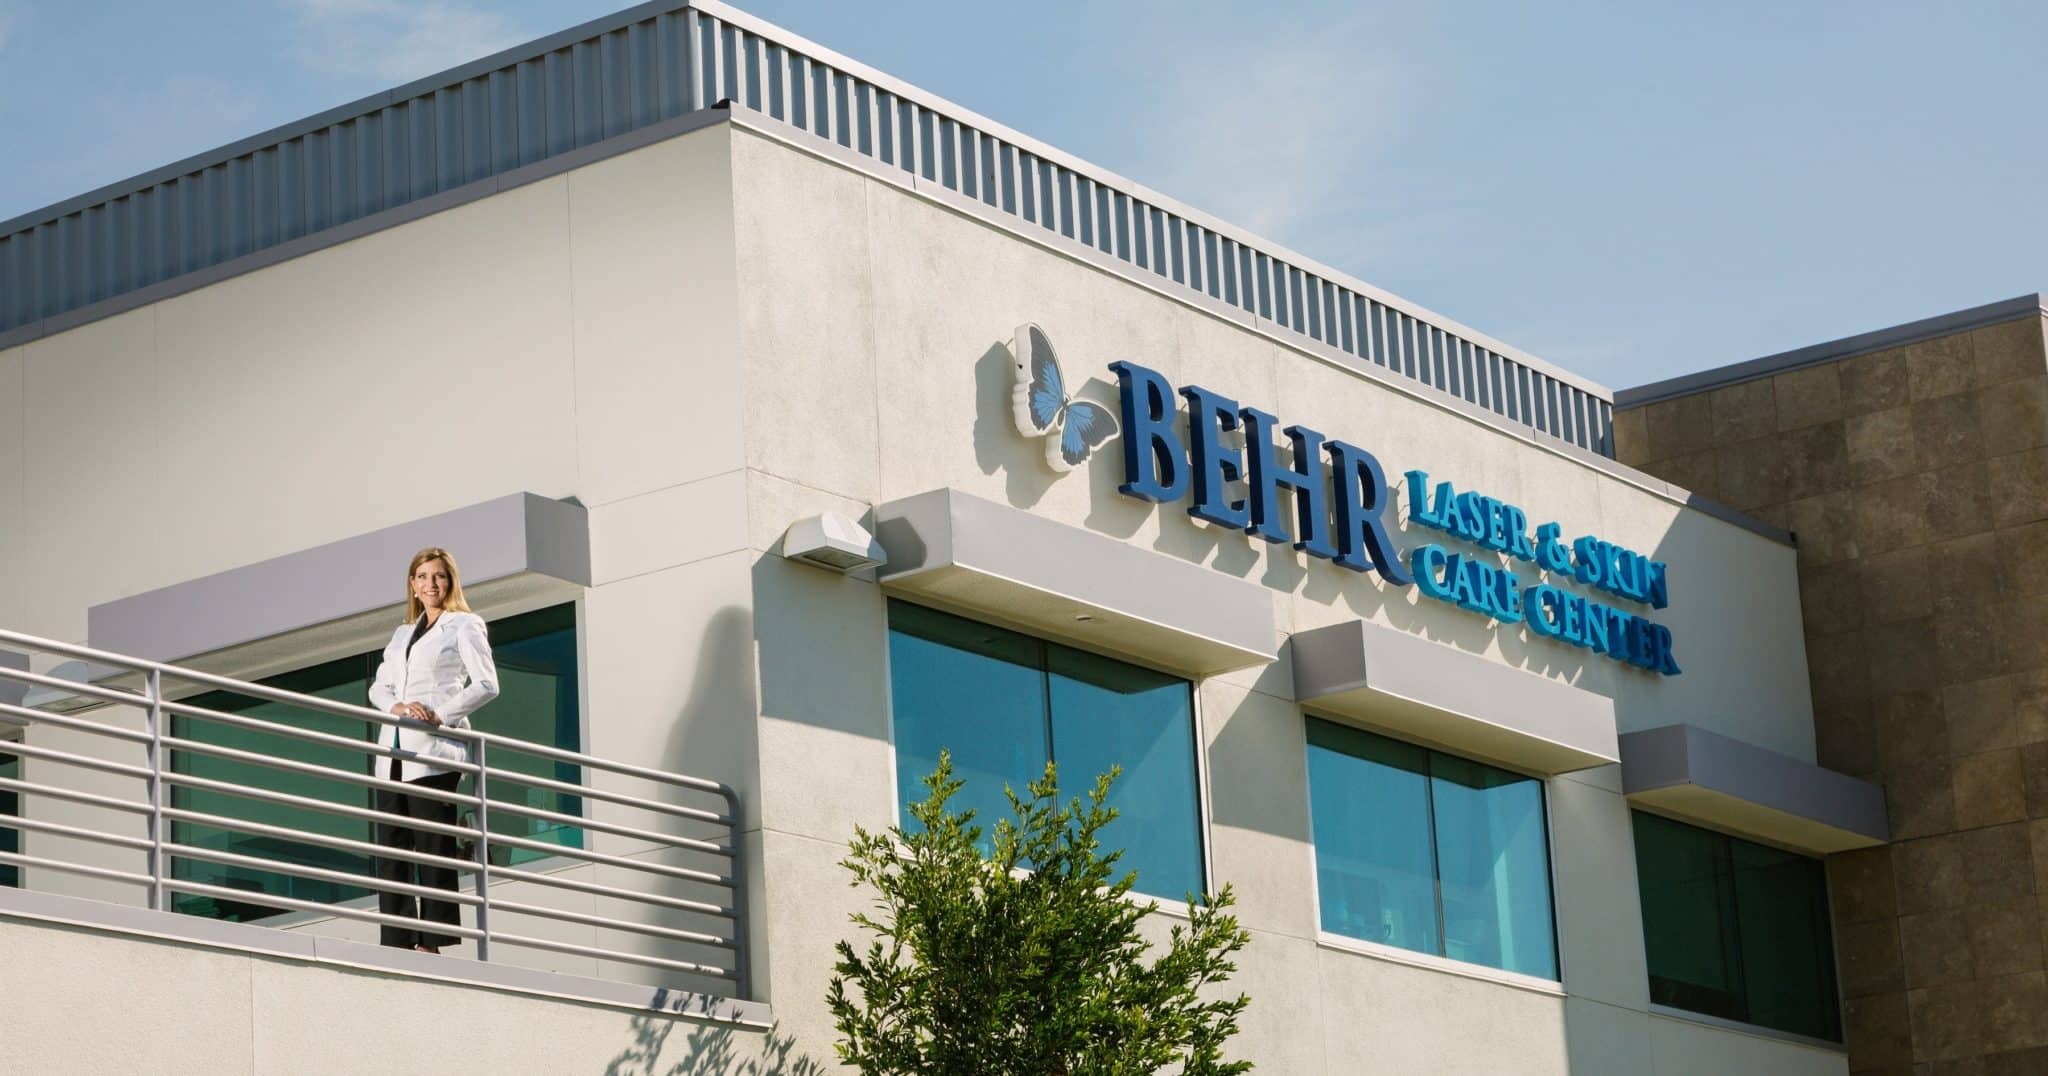 About Behr Laser & Skin Care Center of Fresno, CA